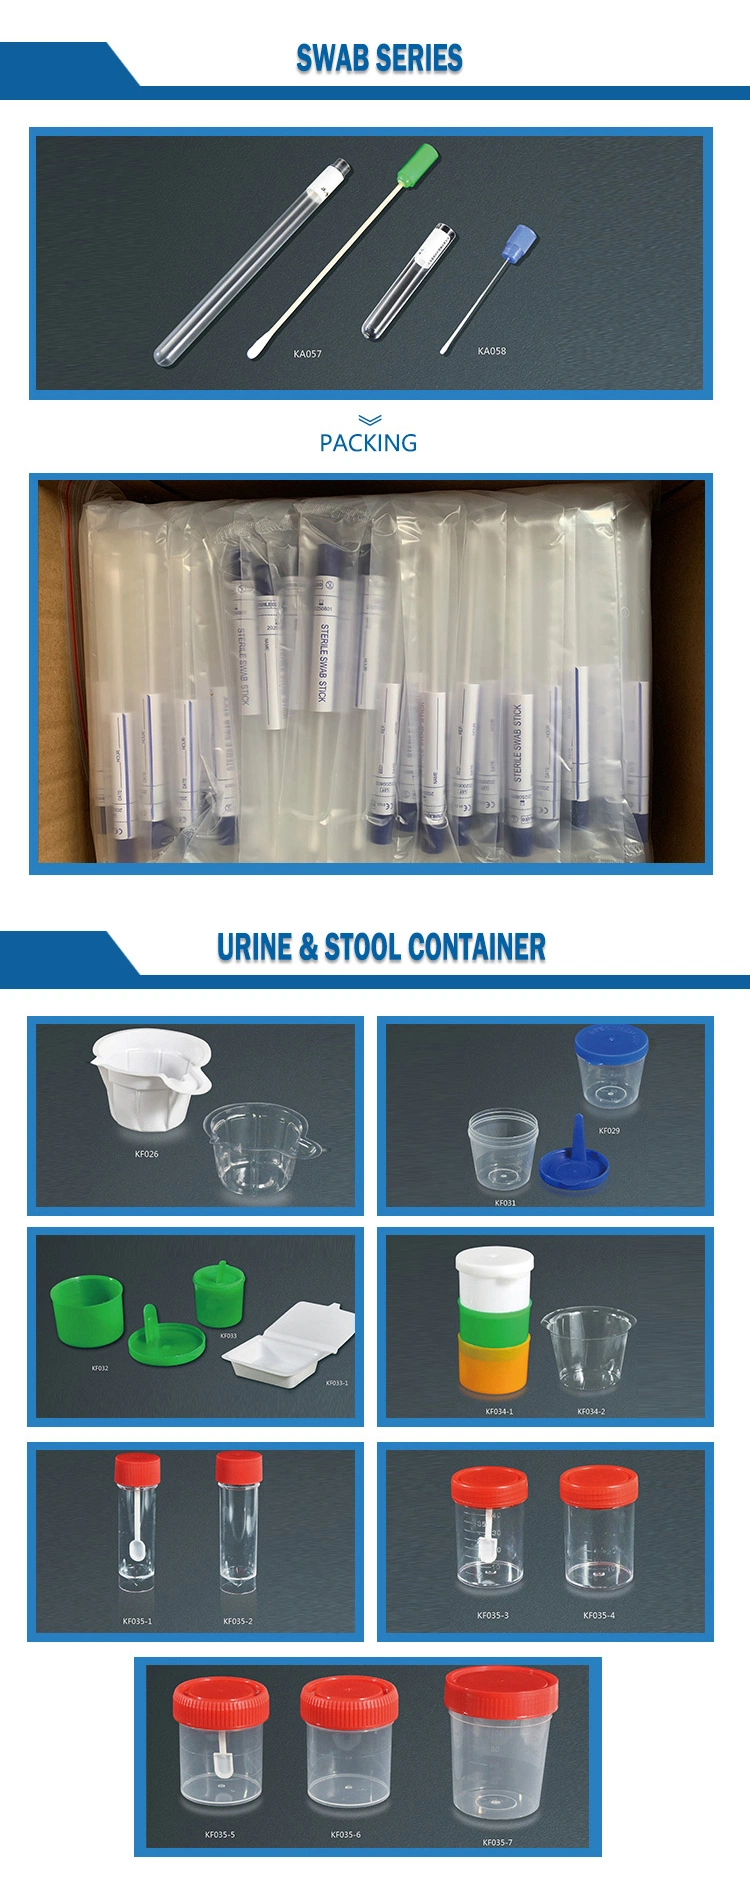 Hot Sale High Quality Laboratory Disposable Sterile Plastic/Glass Test Tubes